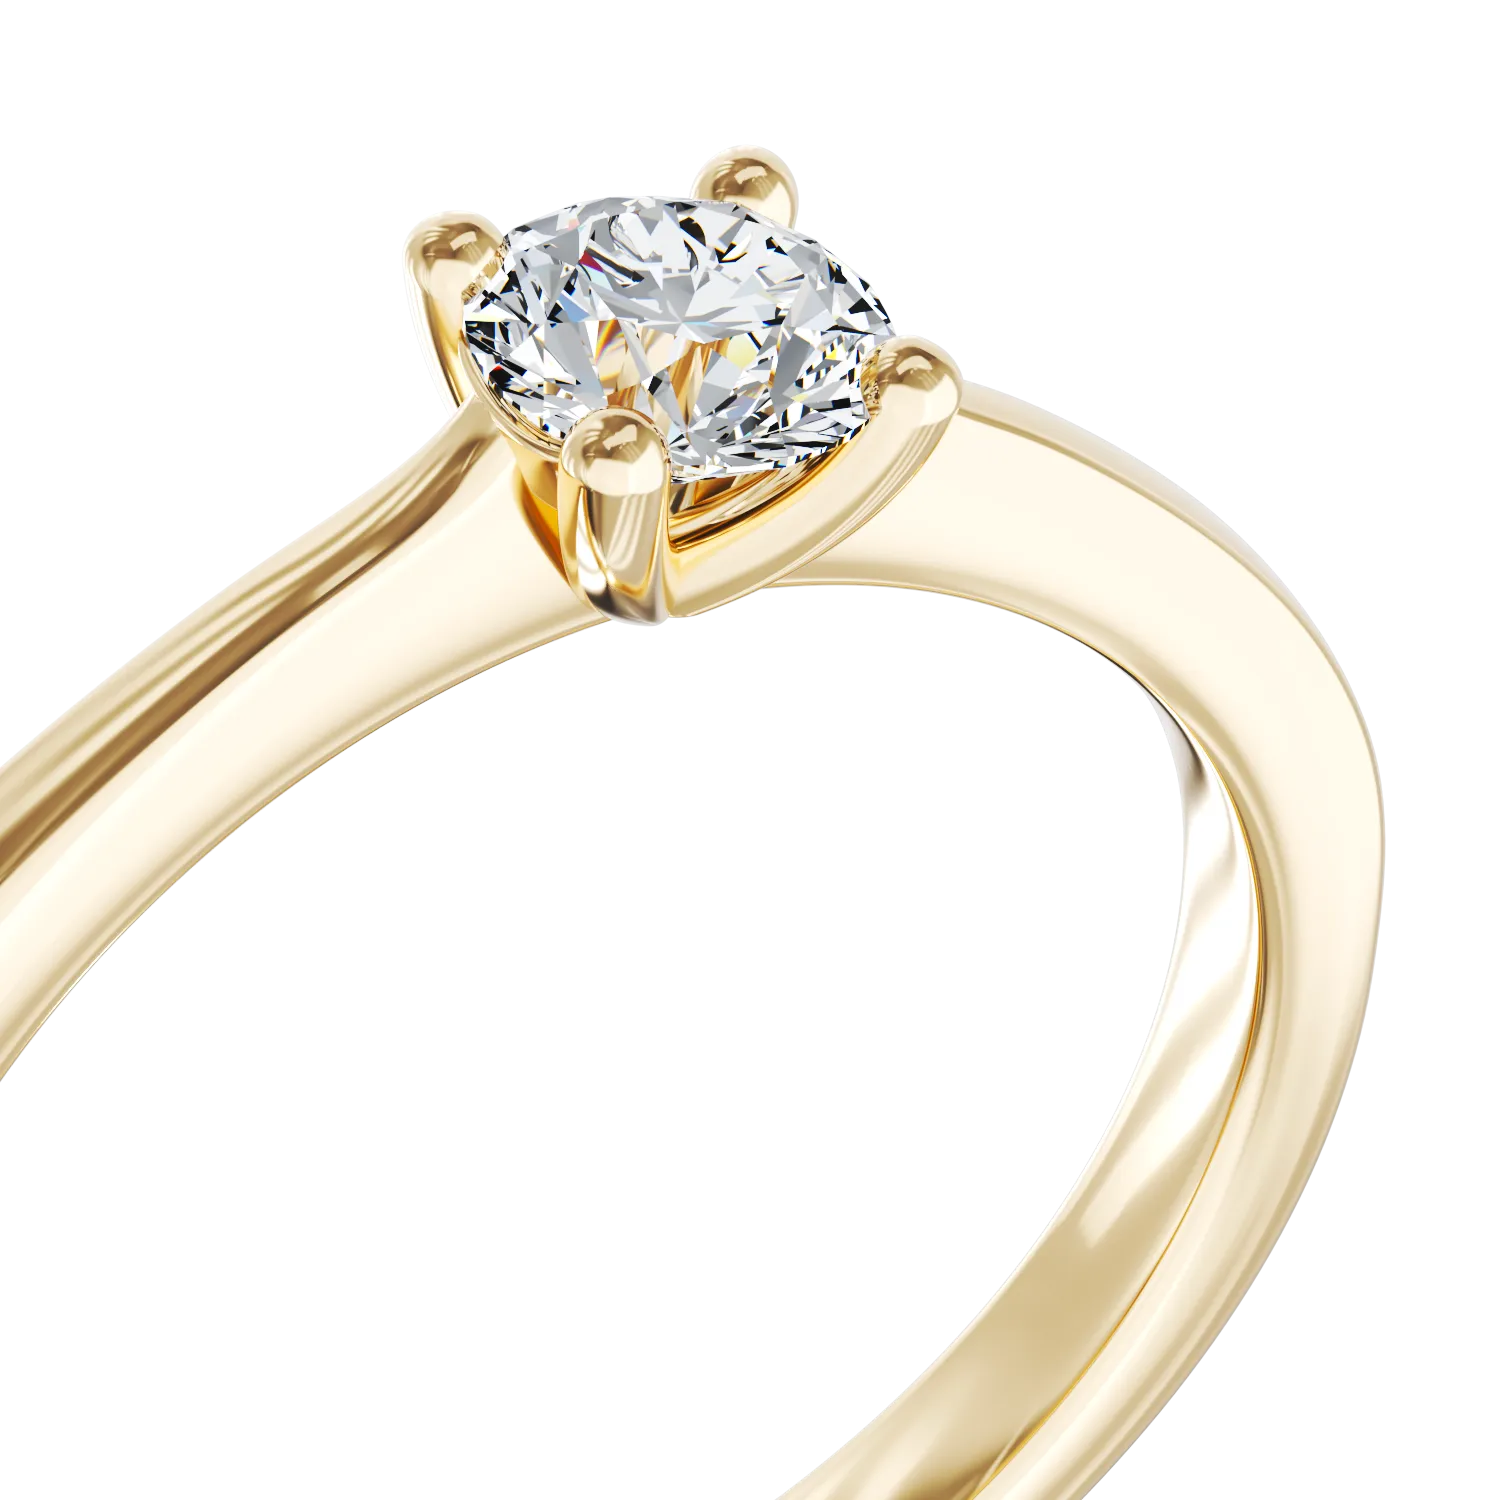 18K yellow gold engagement ring with 0.3ct diamond